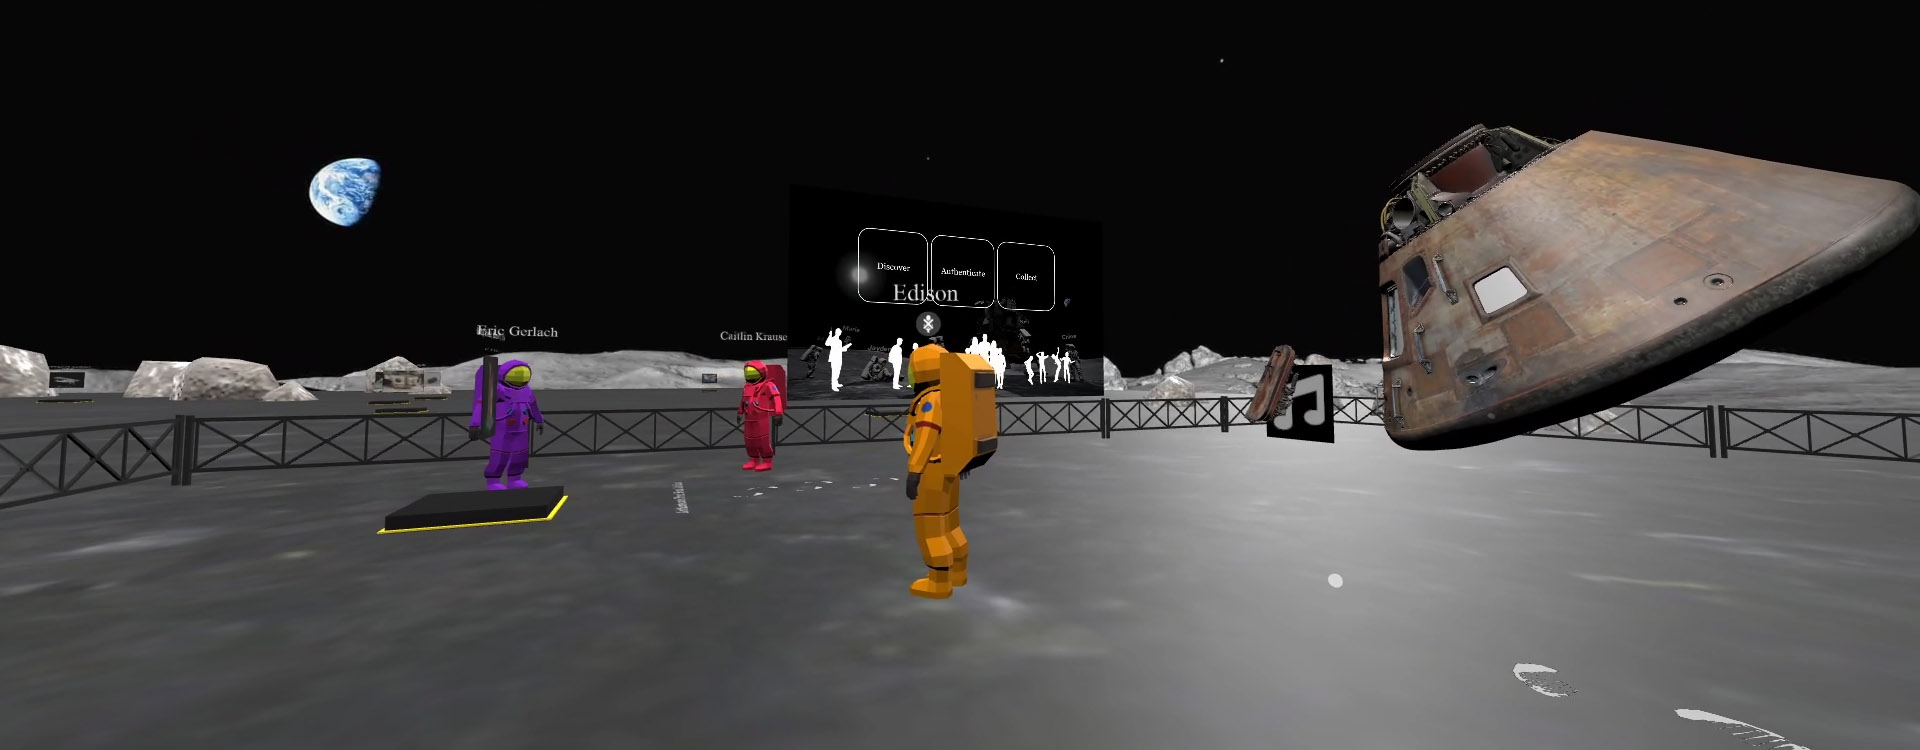 Three player avatars in purple, red and orange are scattered inside a fenced in space in the moonscape. To the right is a floating Apollo 11 module. In the background is a floating screen that shows silhouetted figures in white, with the words 